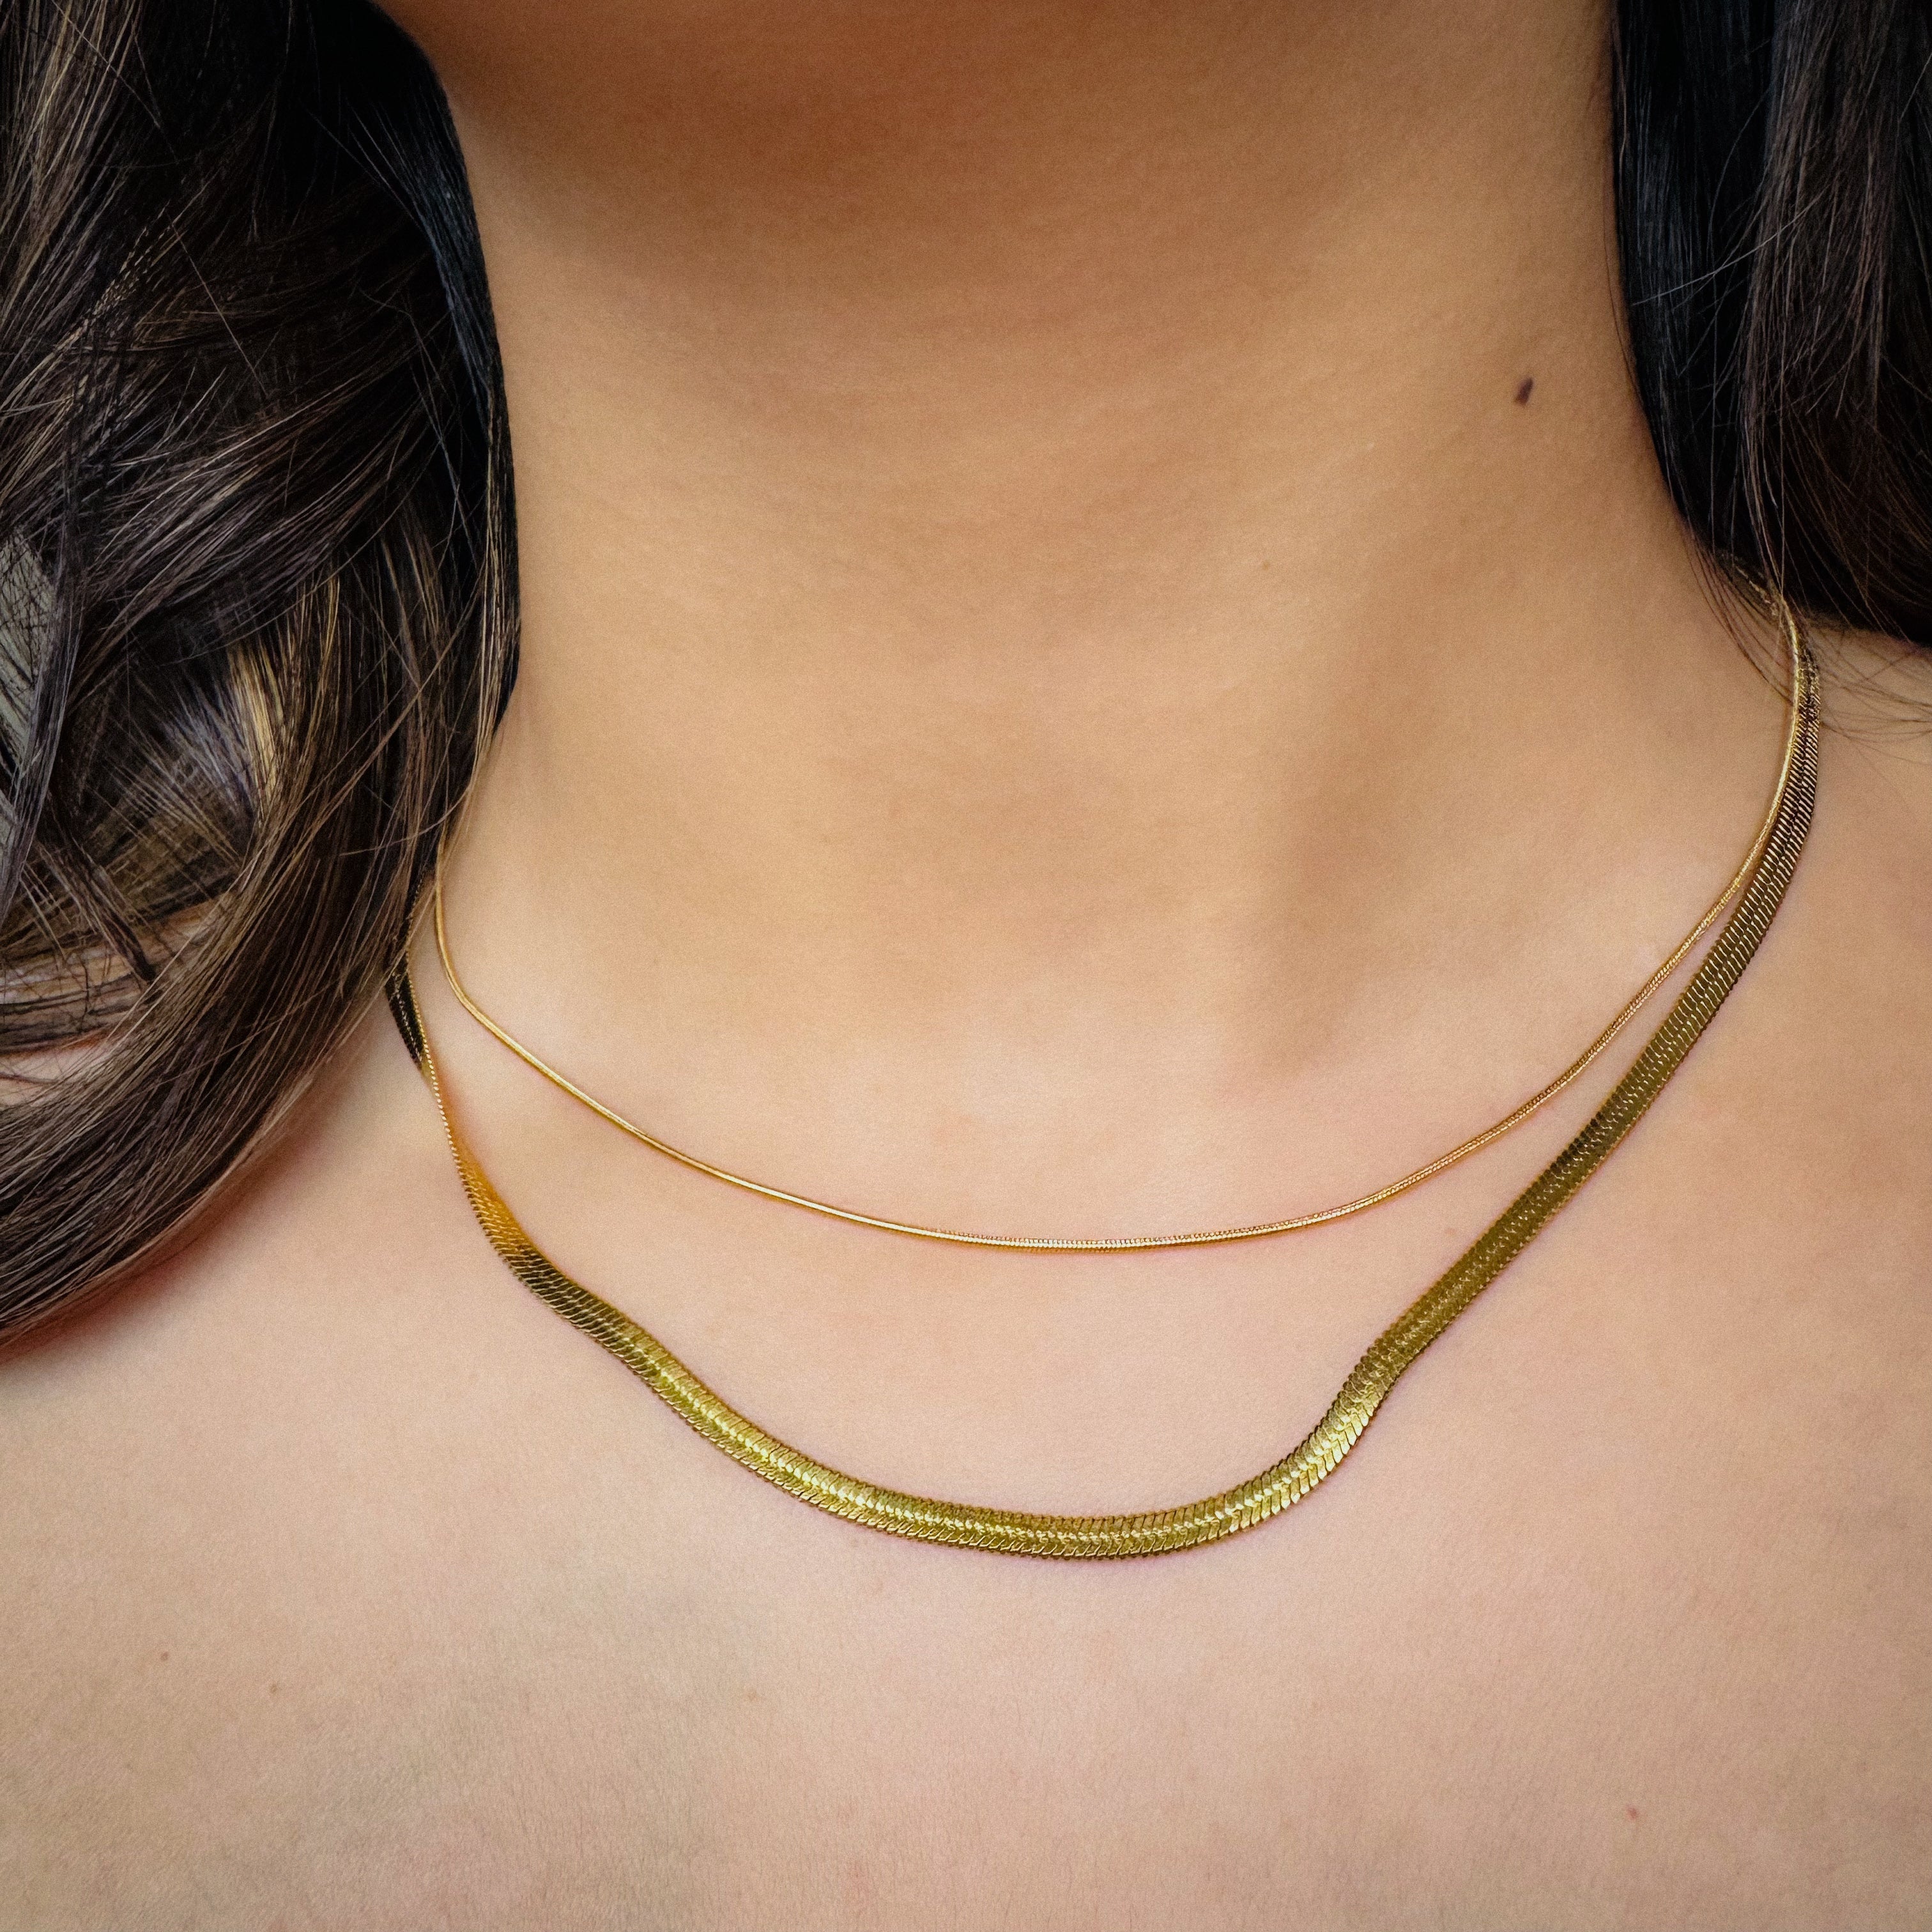 Tewiky Herringbone Necklace for Women Dainty 14k Gold Snake Chain Necklace  Layered Gold Herringbone Double Flat Snake Chain Choker Necklace Thin  Chunky Chain Necklace Gift for Her, Metal: Buy Online at Best